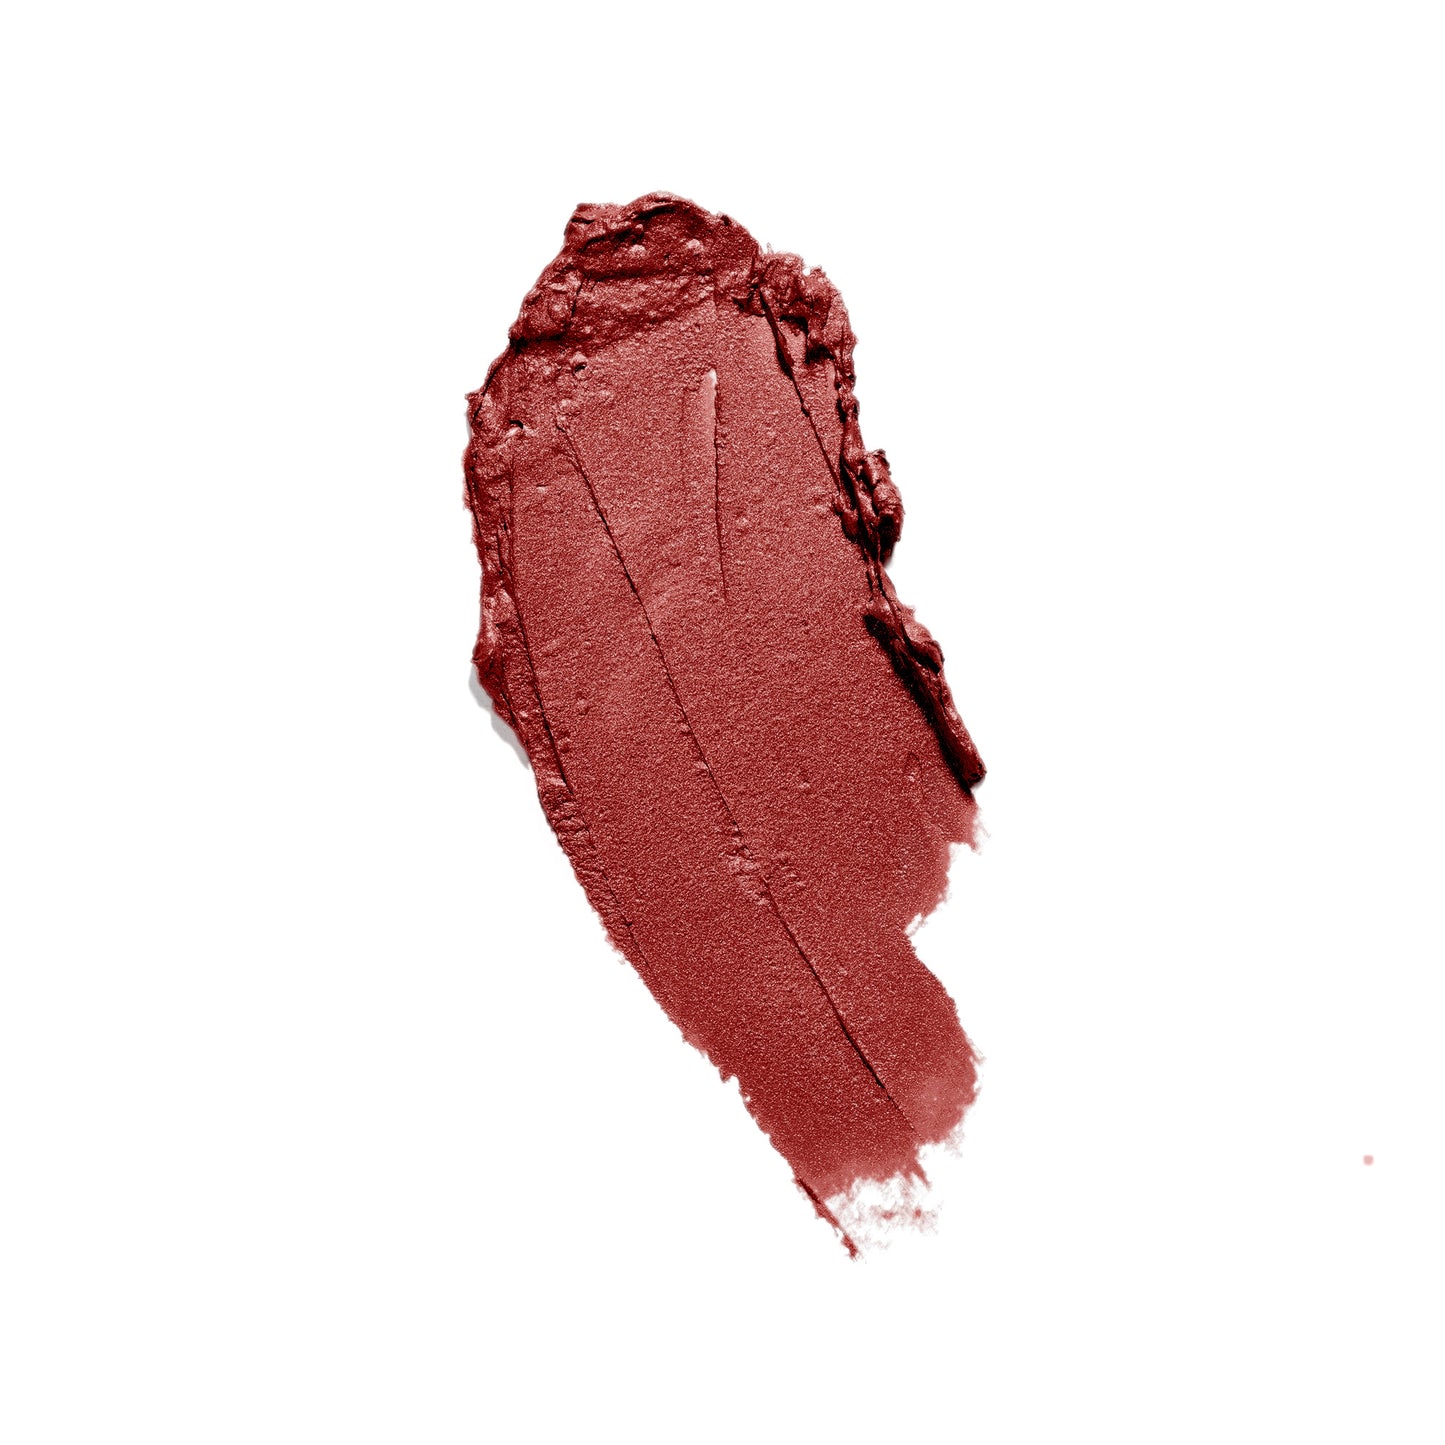 Detailed image of a satin lipstick from the Natural-Cruelty-Free collection on white